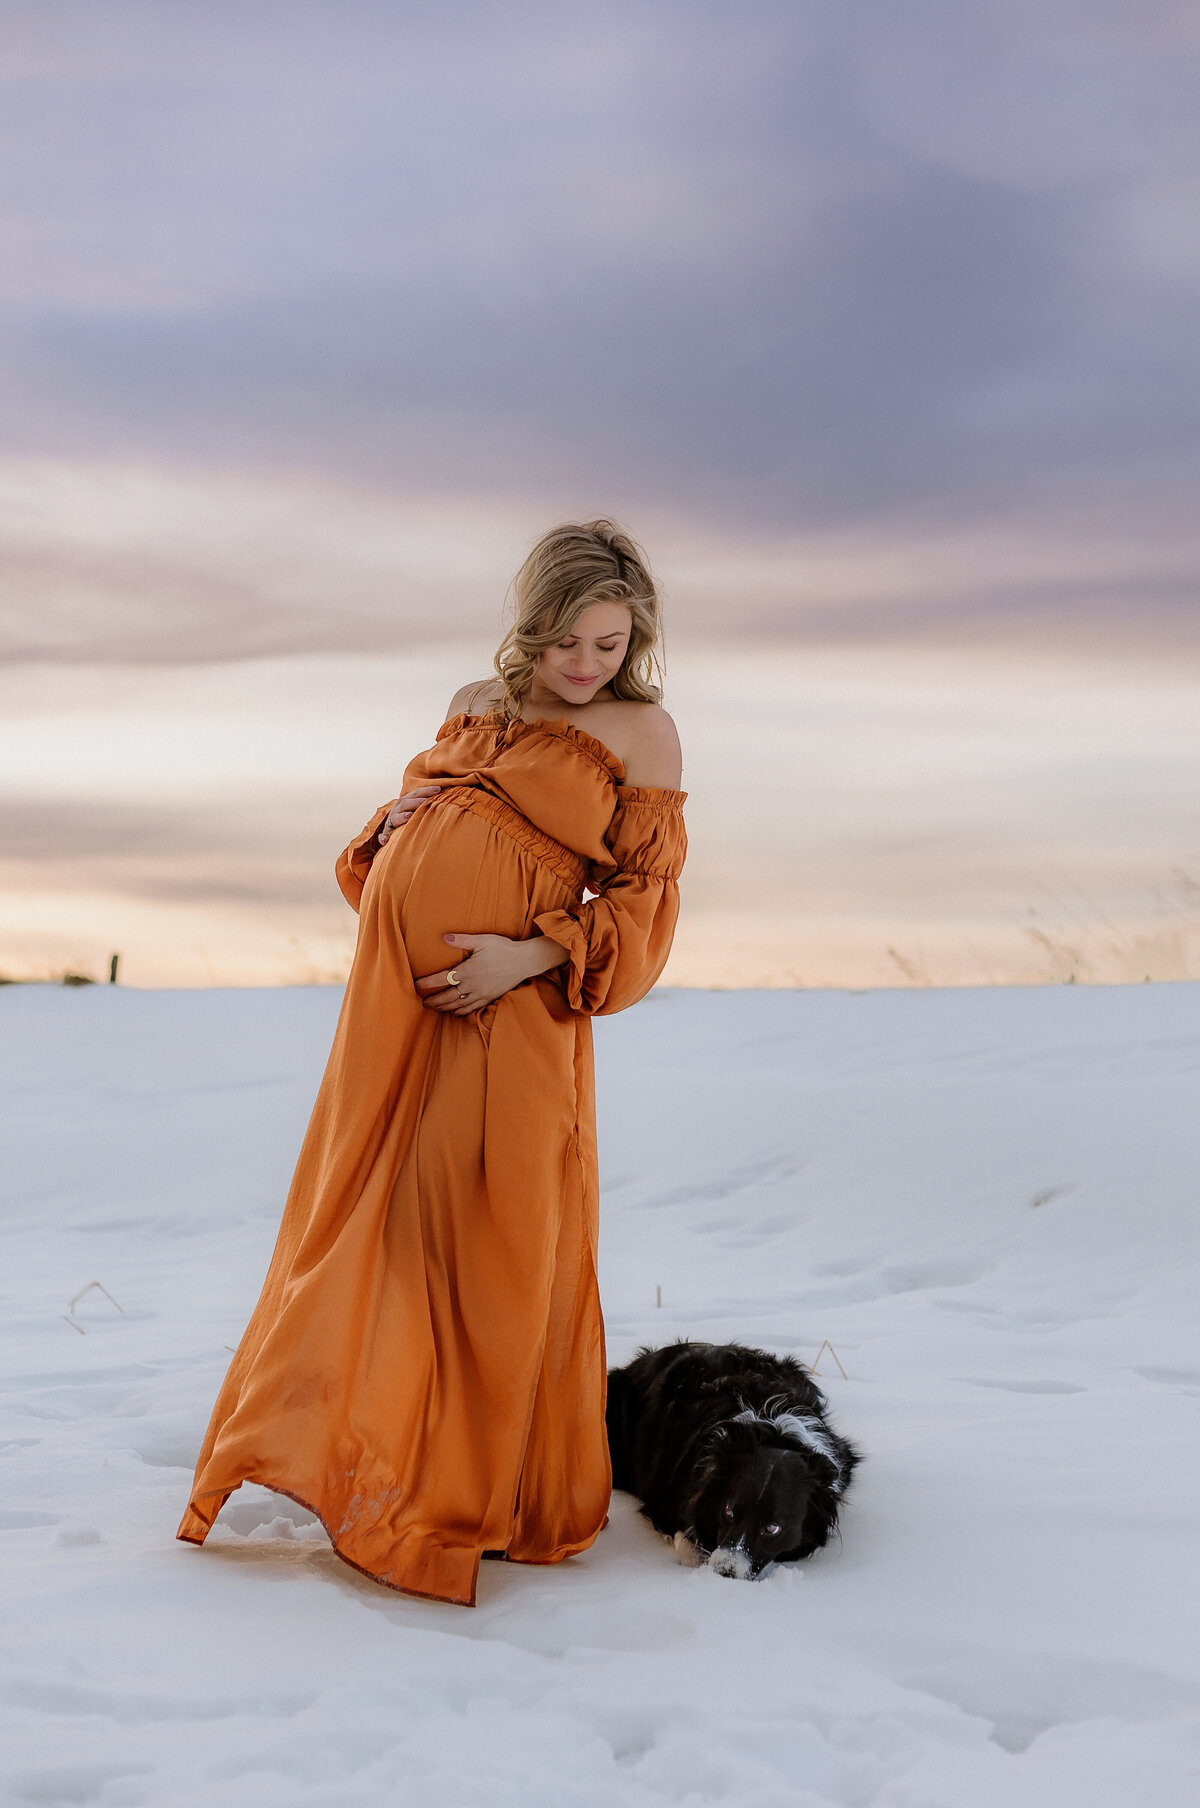 Witness the unveiling of maternity elegance through my expertise in Calgary. Let's capture your journey with bold and breathtaking maternity photography.